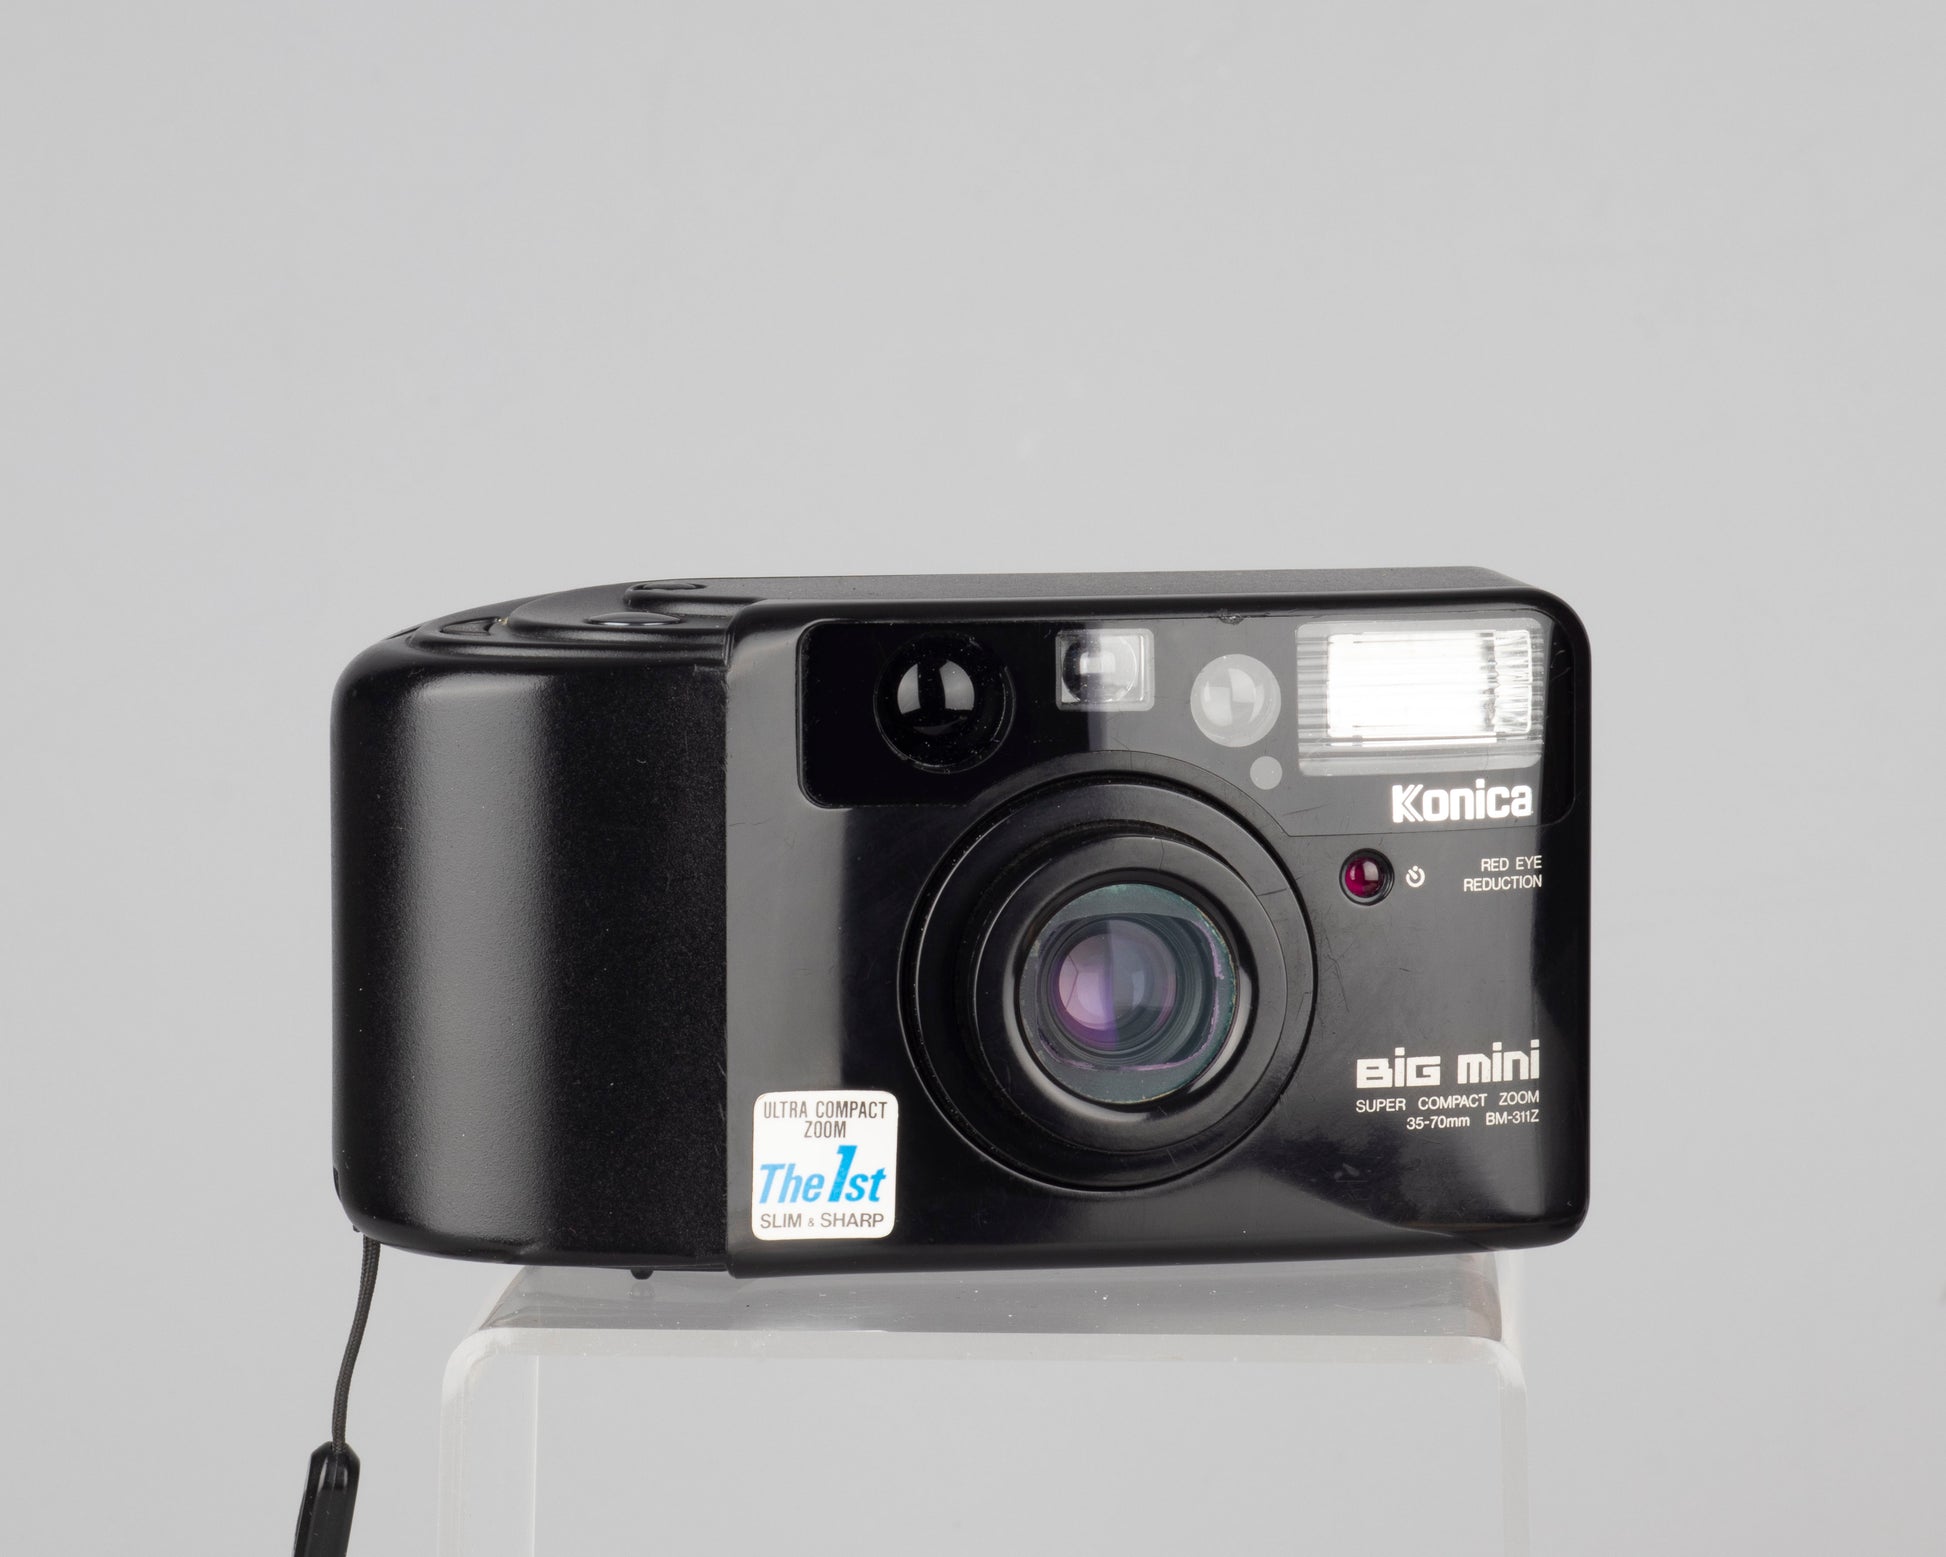 The Konica Big Mini MB-311Z is a quality 35mm point-and-shoot from 1992 featuring a 35-70mm zoom lens